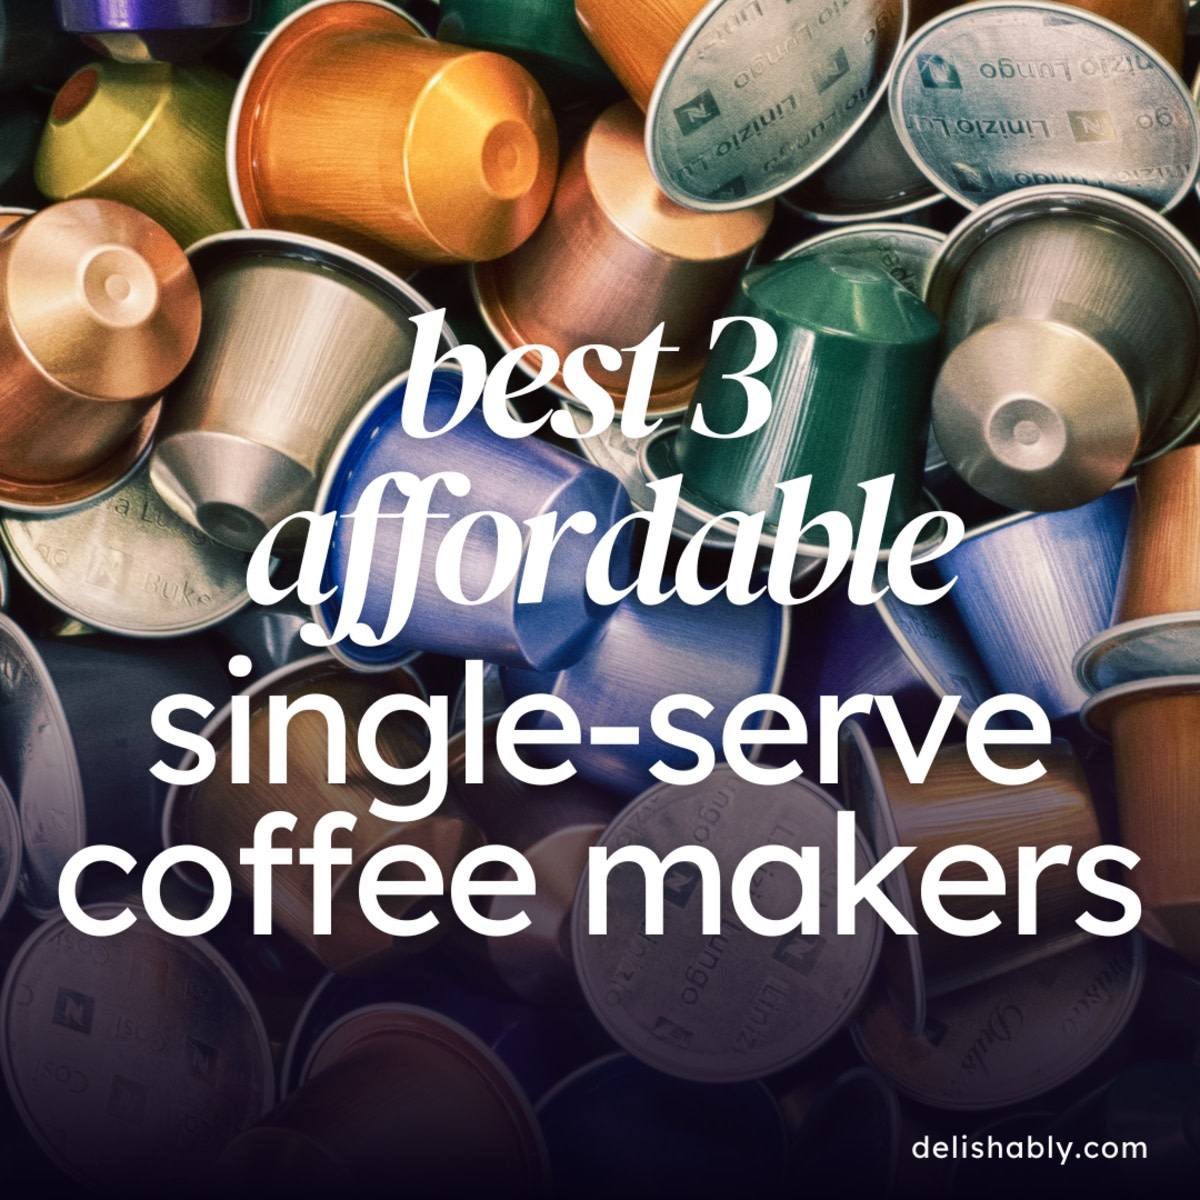 https://images.saymedia-content.com/.image/t_share/MjAxNDQxNzA4Mzk3ODk2NzYy/3-best-low-cost-single-serve-coffee-makers.jpg